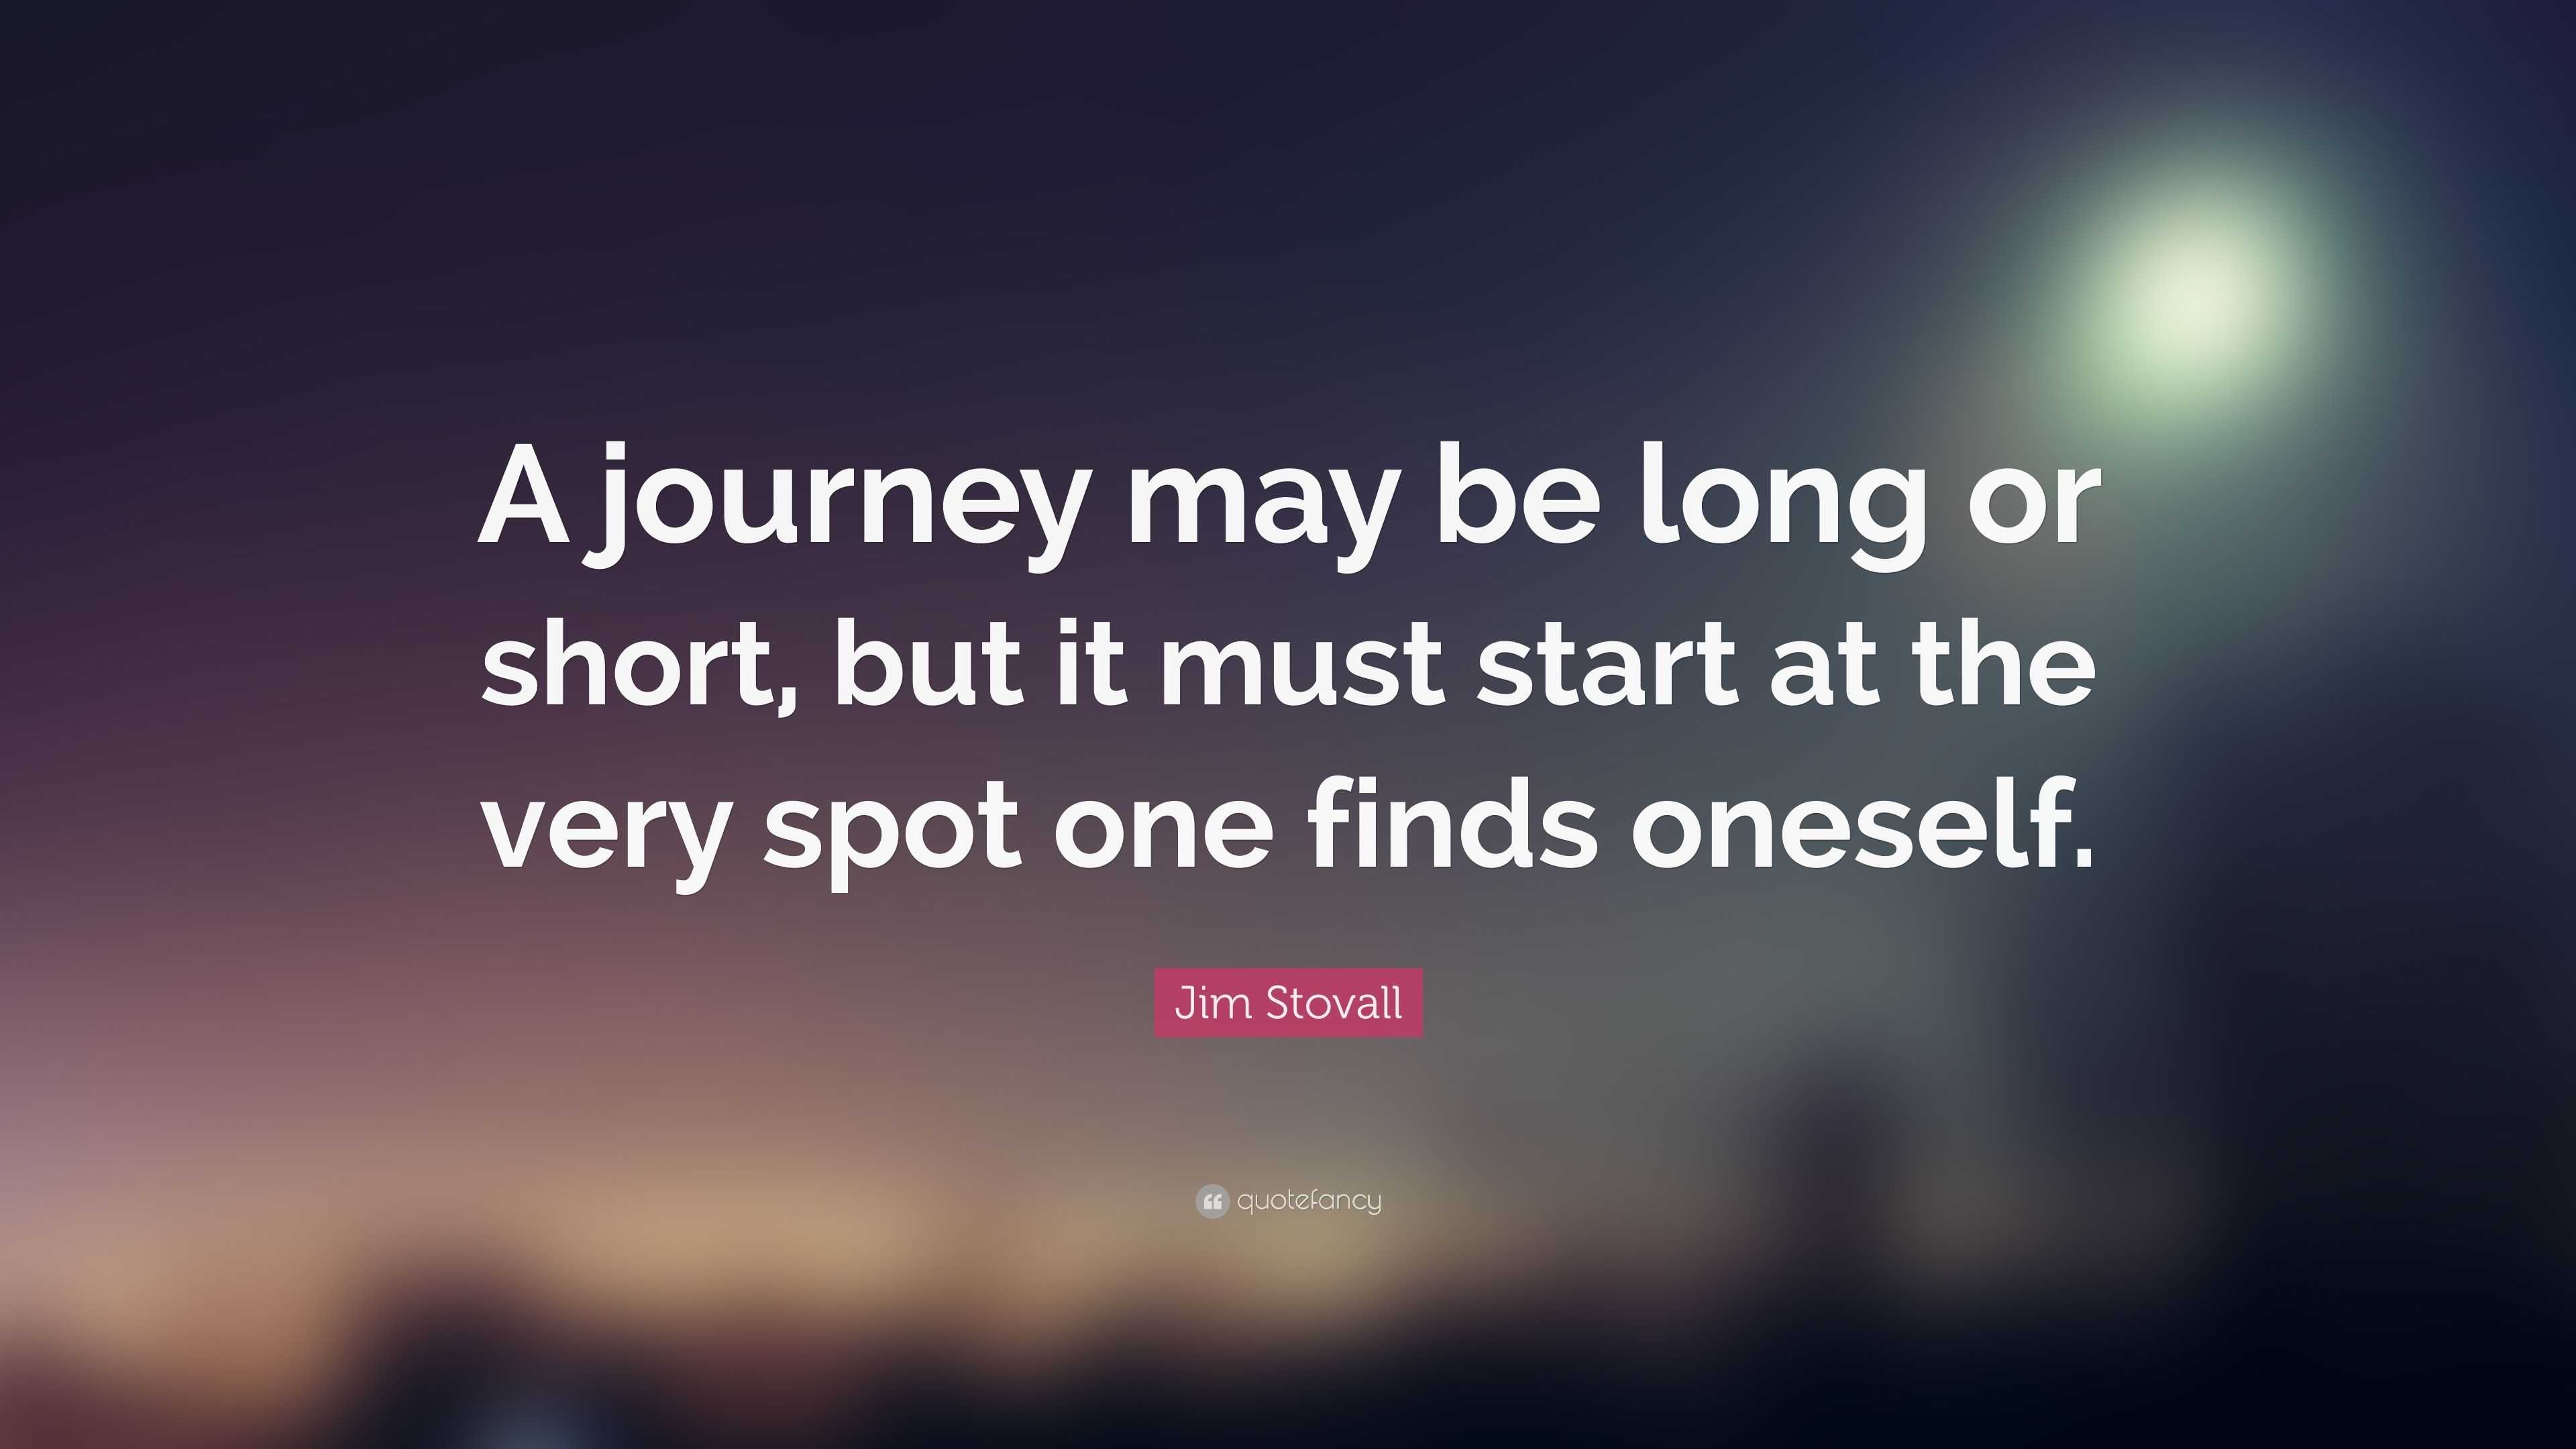 Jim Stovall Quote: “A journey may be long or short, but it must start ...